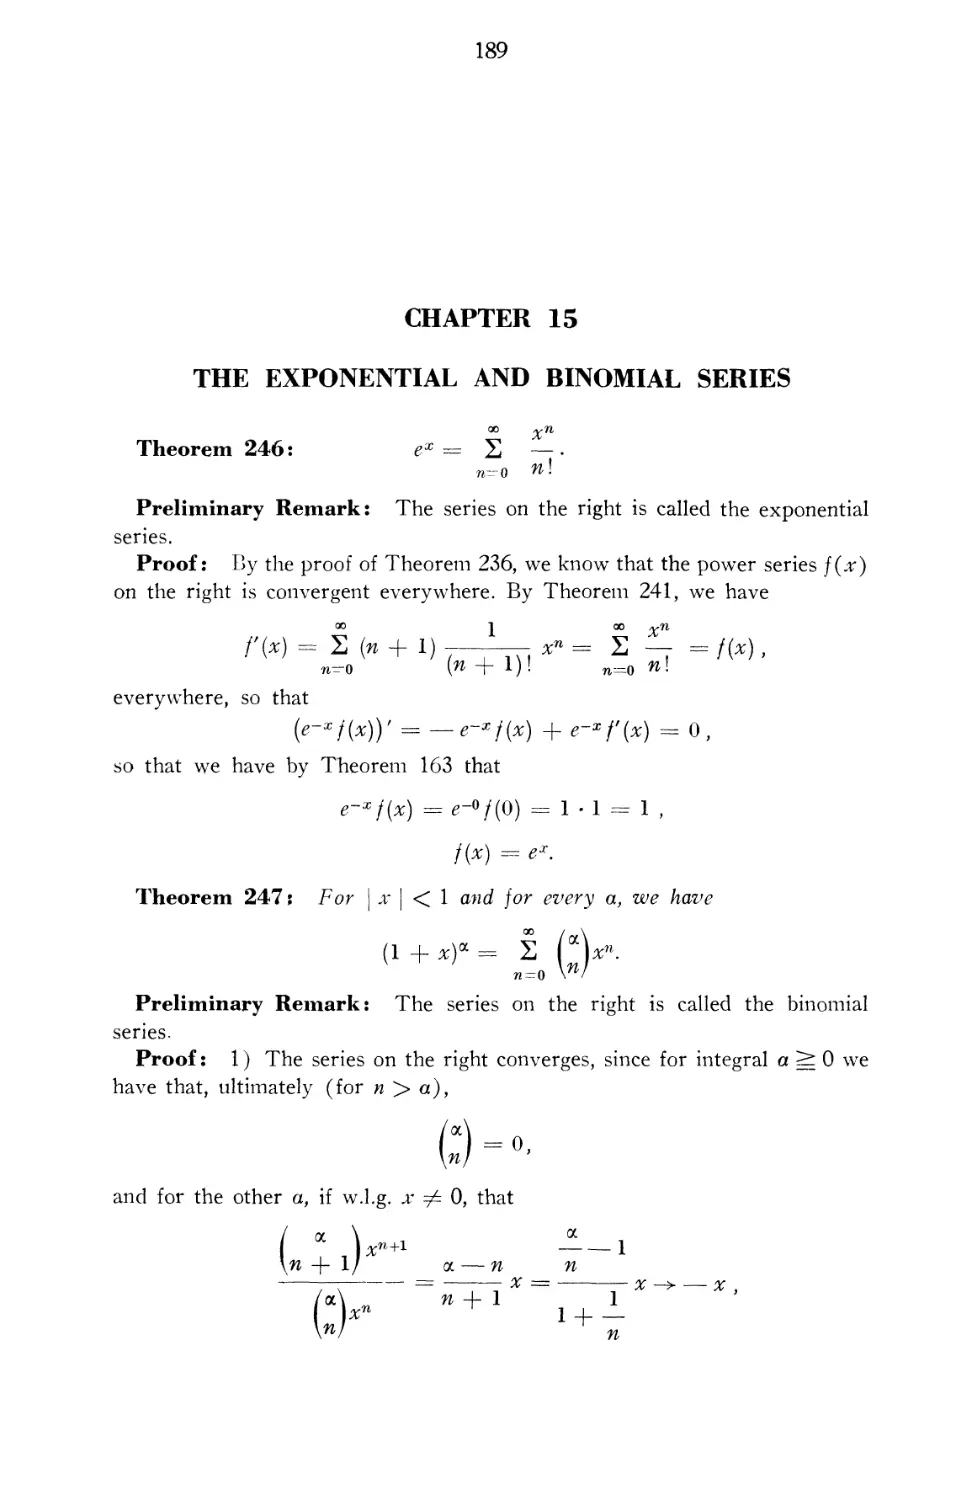 Chapter 15 Exponential Series and Binomial Series